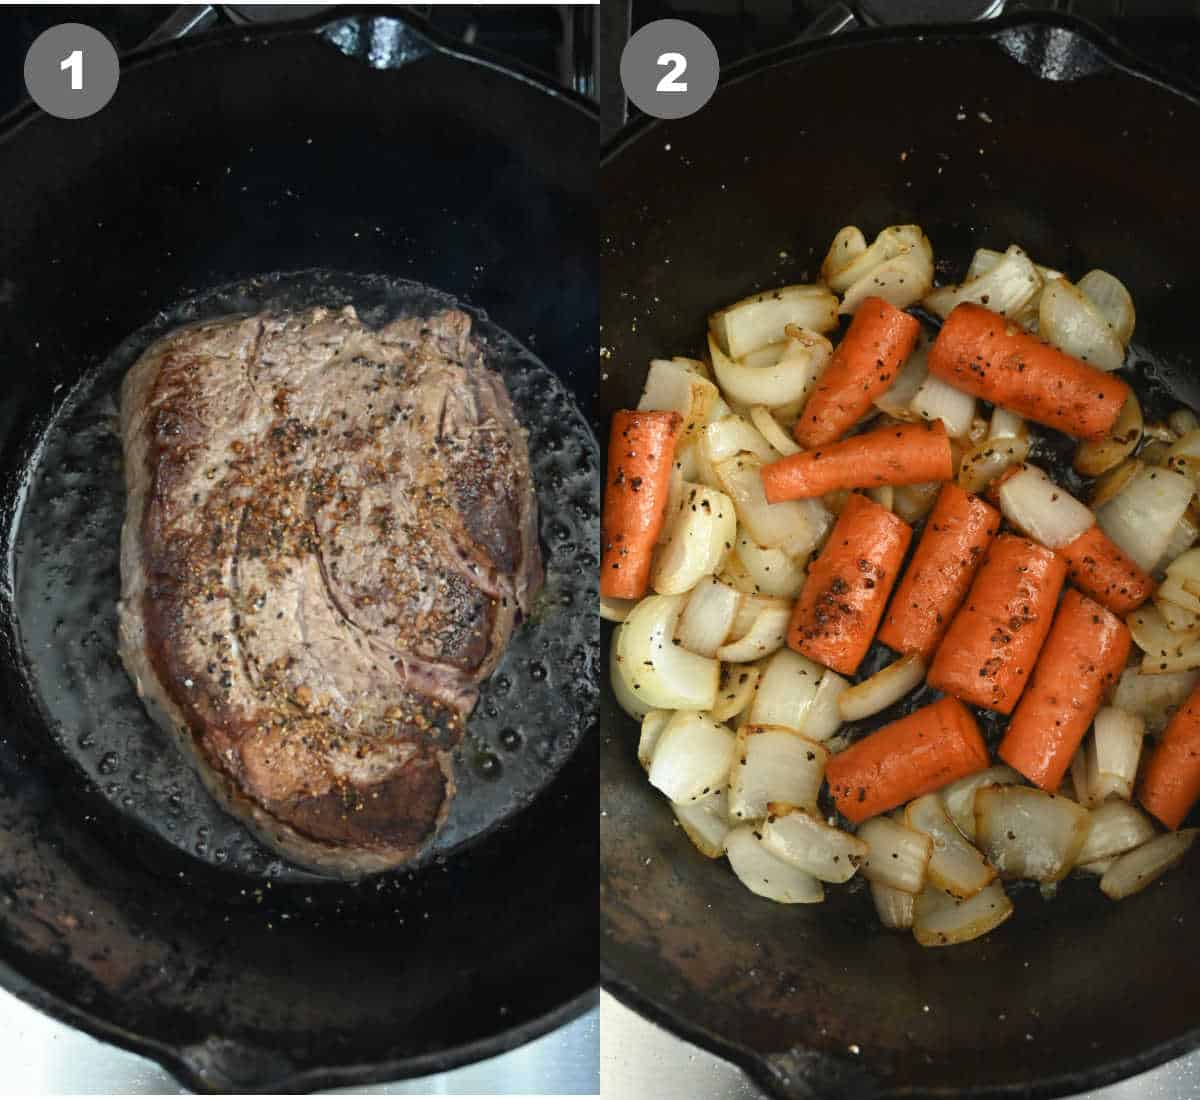 pot roast seared in a cast iron skillet, then the carrots and onions added in to brown.